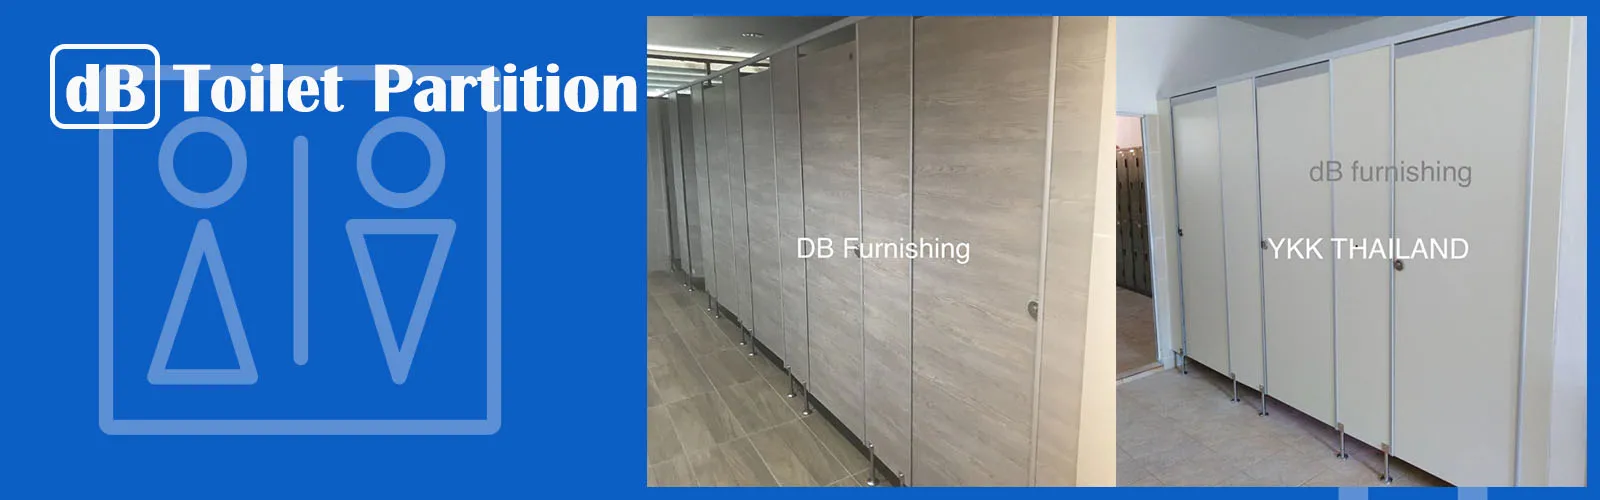 dB toilet partition banner03